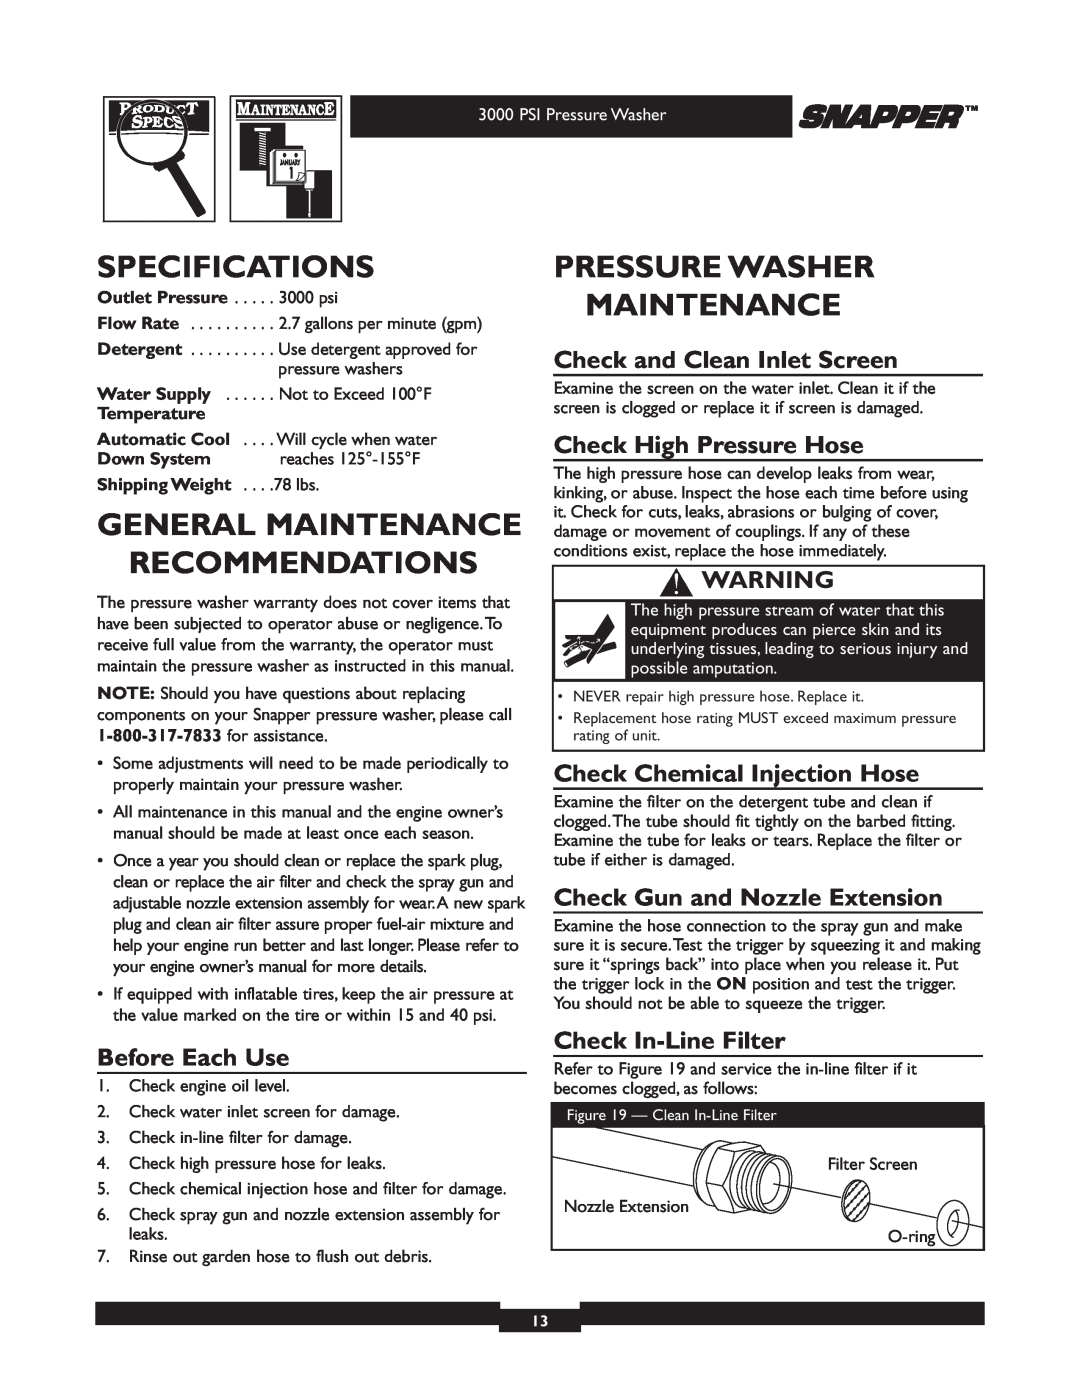 Snapper 020231 Specifications, General Maintenance Recommendations, Pressure Washer Maintenance, Check High Pressure Hose 